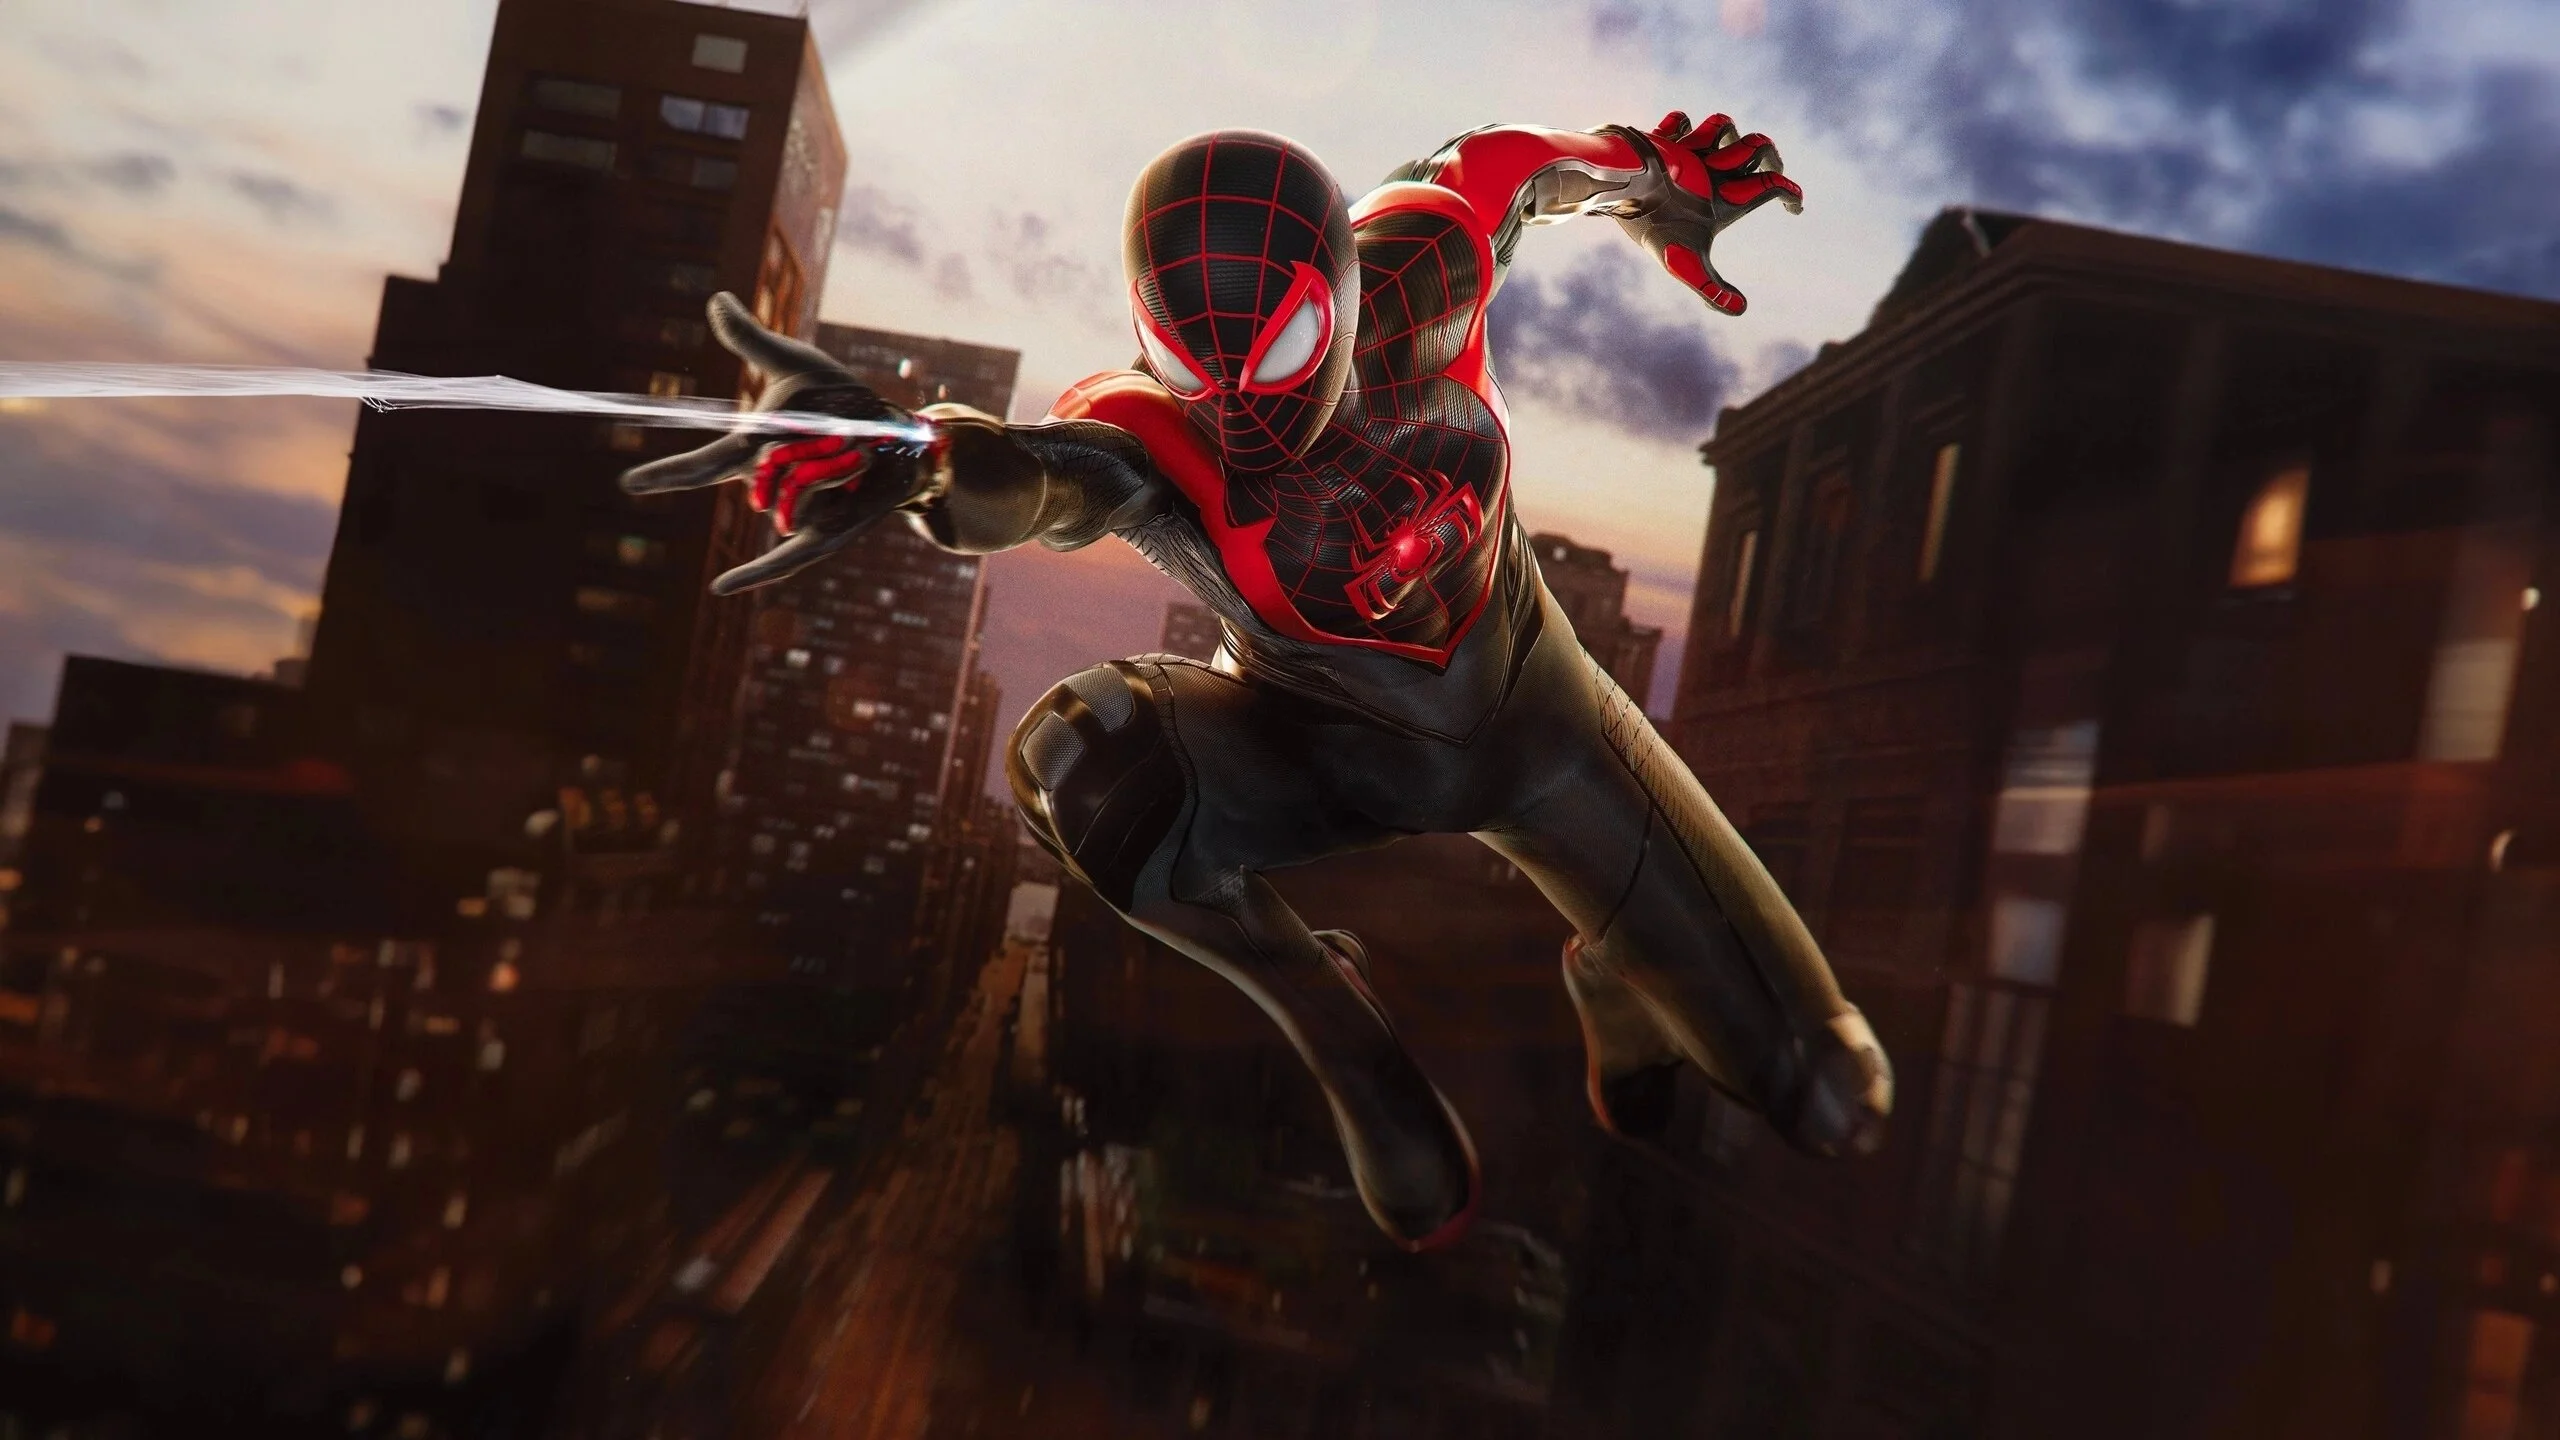 Unofficial PC port of Marvel's Spider-Man 2 from fans can be played in its entirety